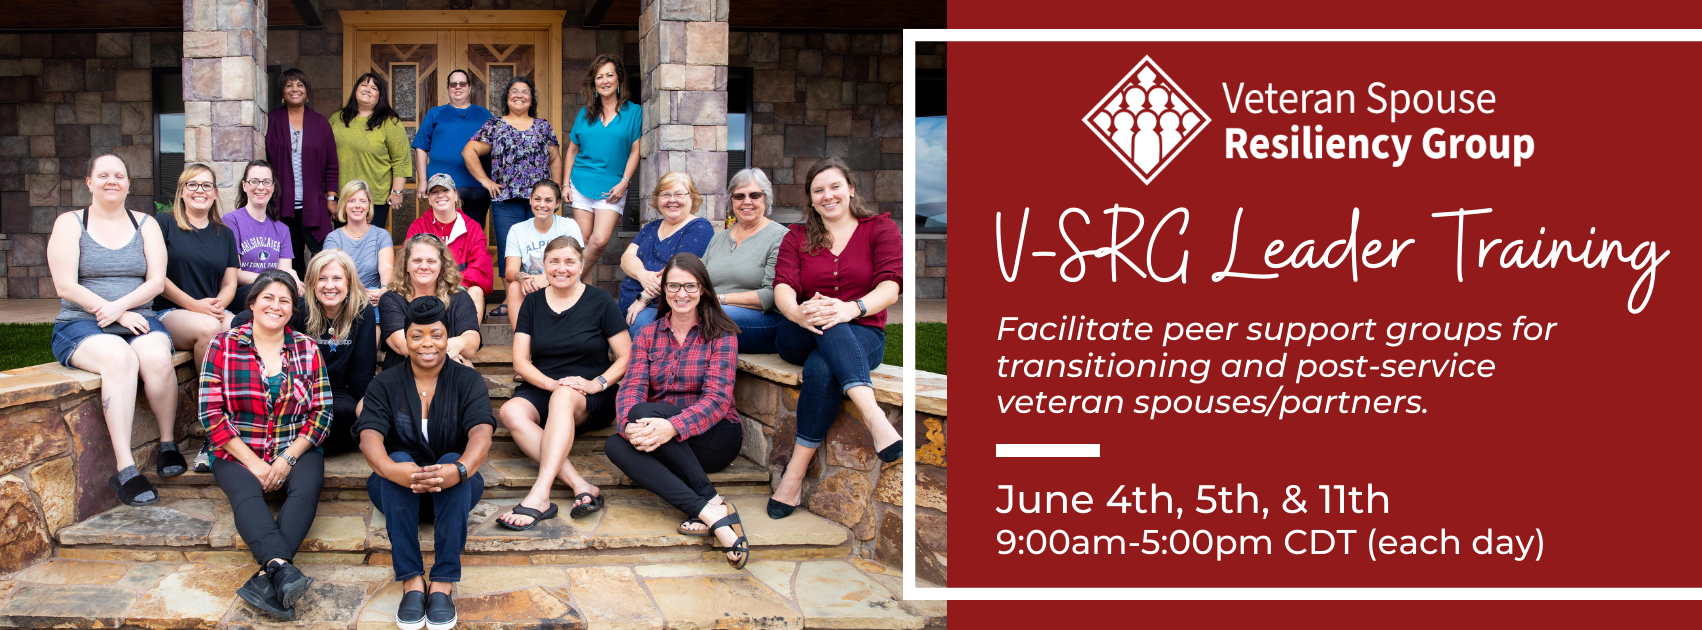 V-SRG Leader Training | June 4, 5, & 11th from 9am-5pm